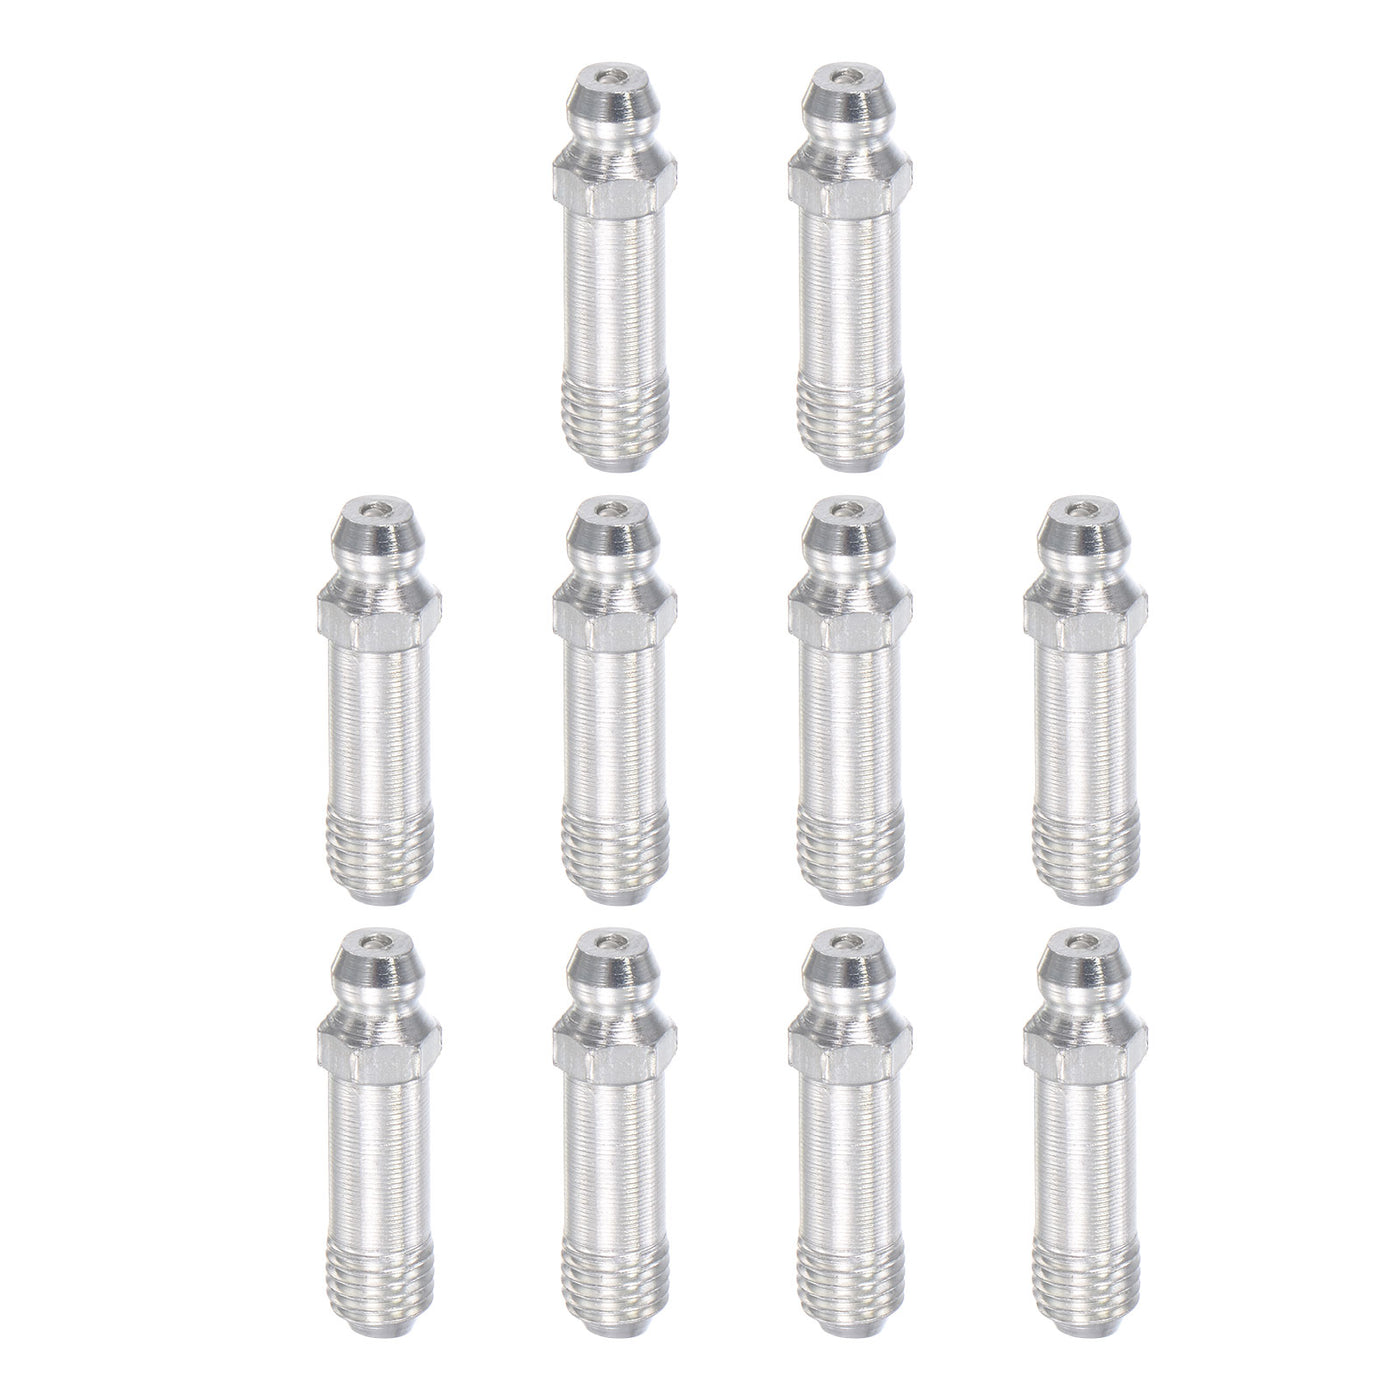 Uxcell Uxcell Steel Straight Hydraulic Grease Fitting Accessories M6 x 1mm Thread, 10Pcs